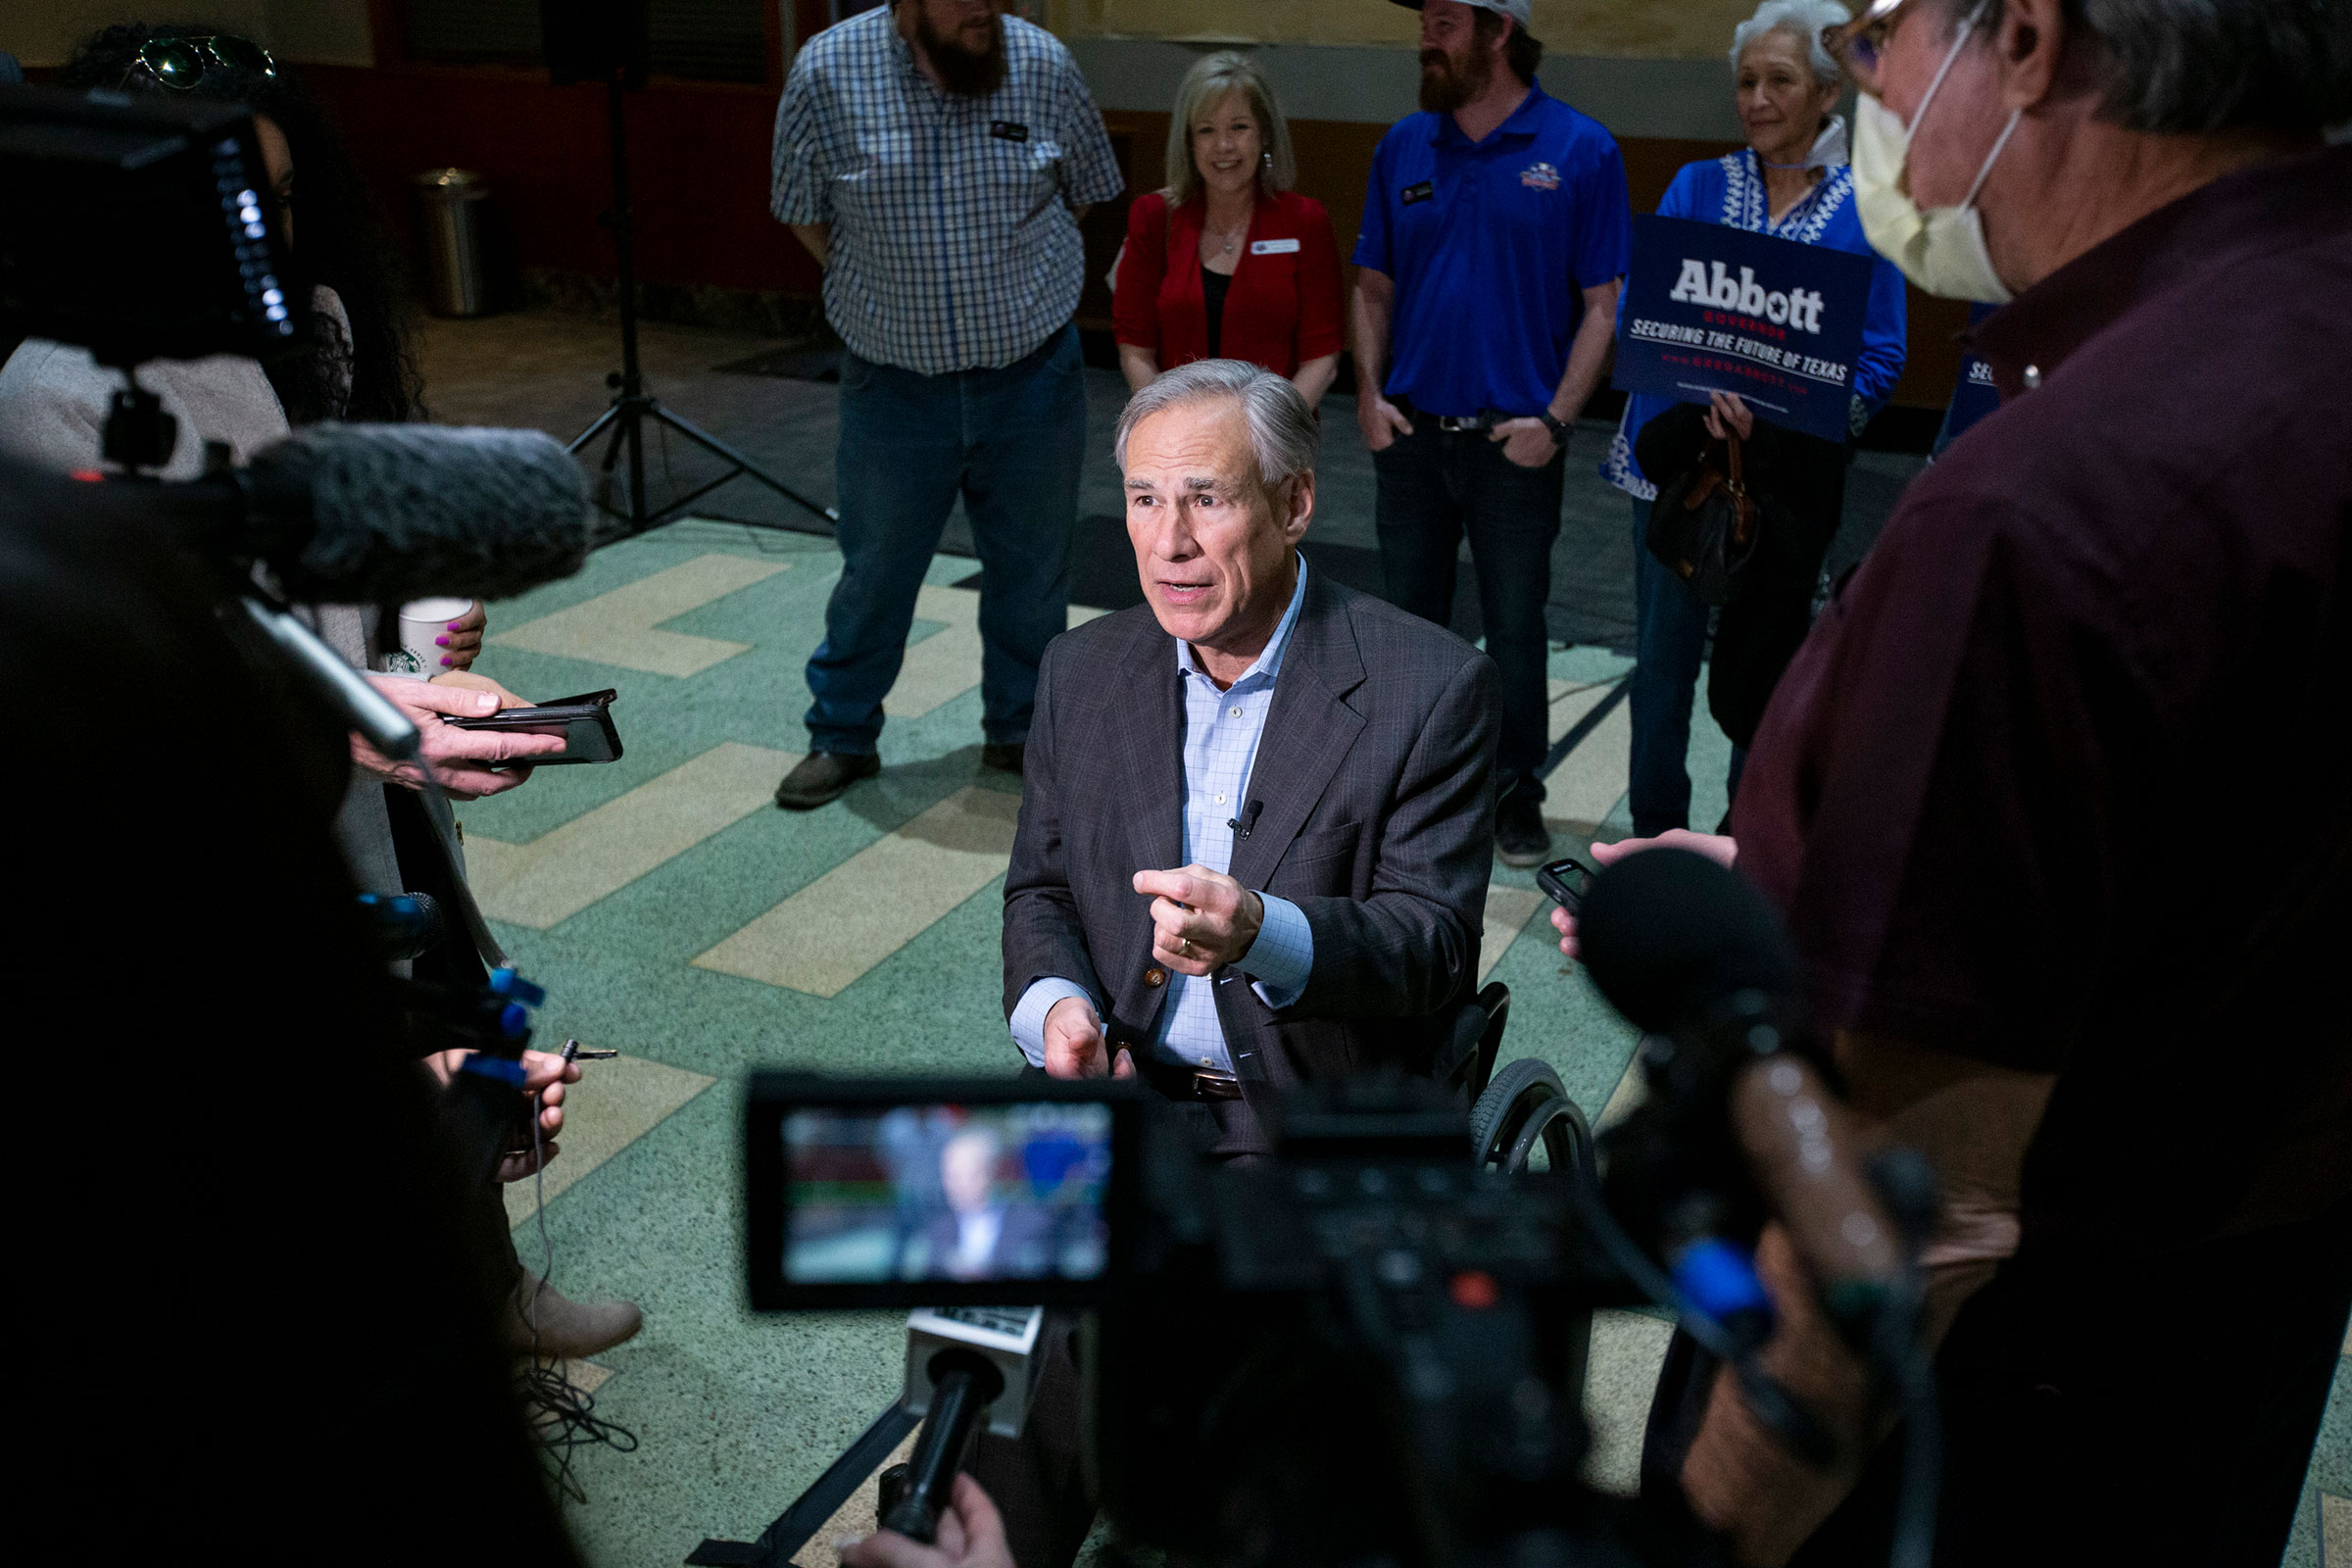 Texas Gov. Greg Abbott speaks to reporters in downtown Odessa, Tx. on Feb. 14, 2022. (Jacob Ford—Odessa American/AP)